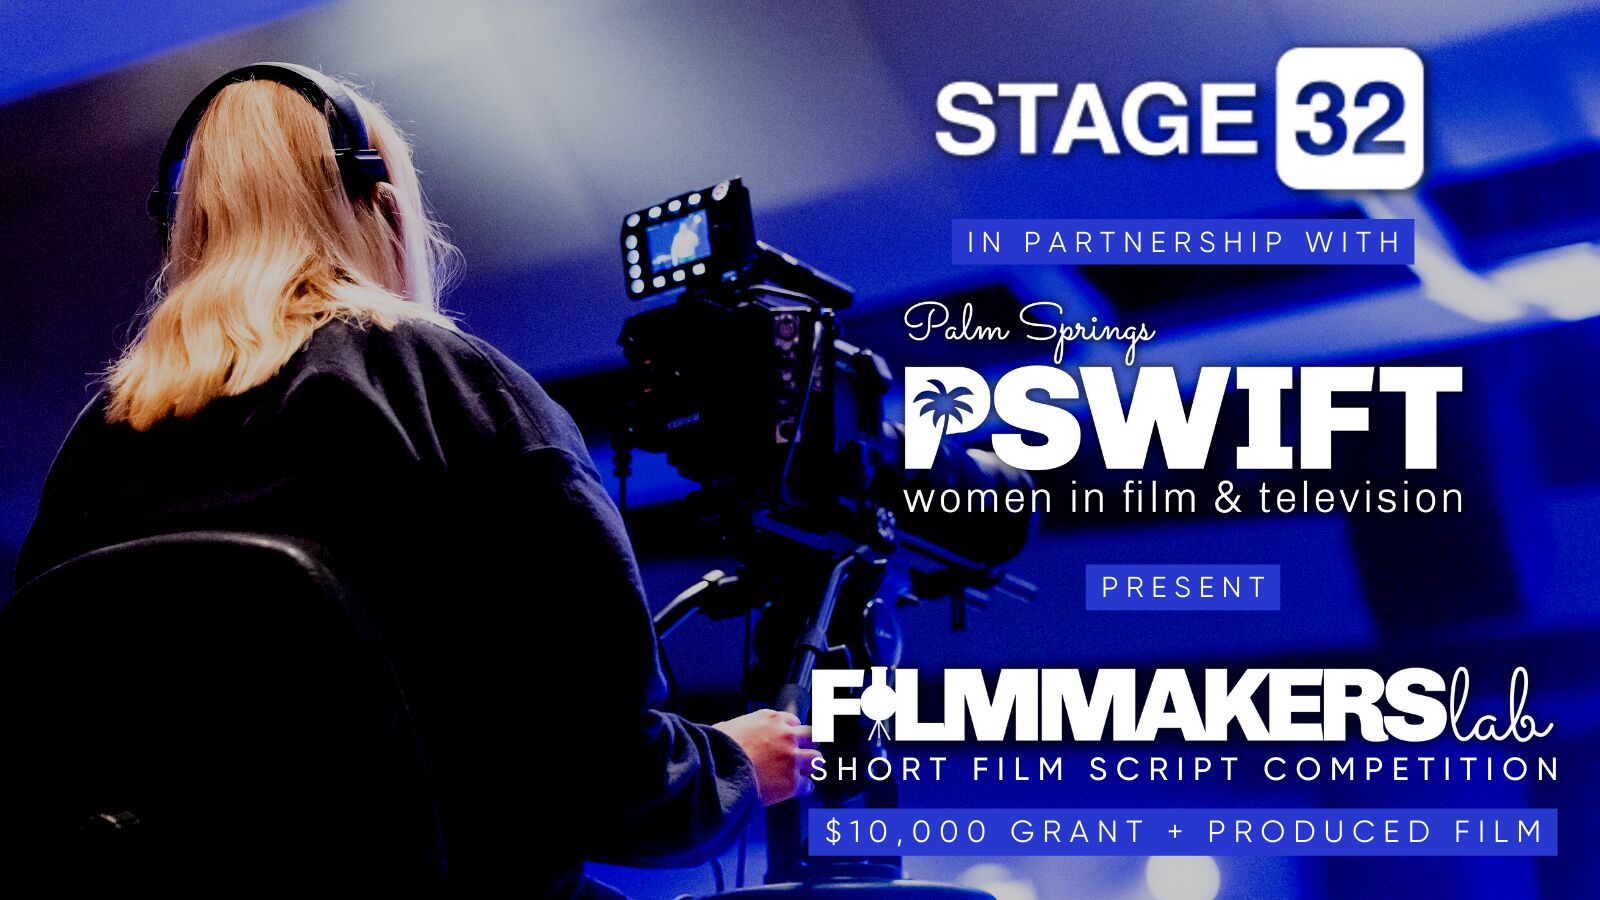 Palm Springs Women in Film & Television & Stage 32 Short Script Competition